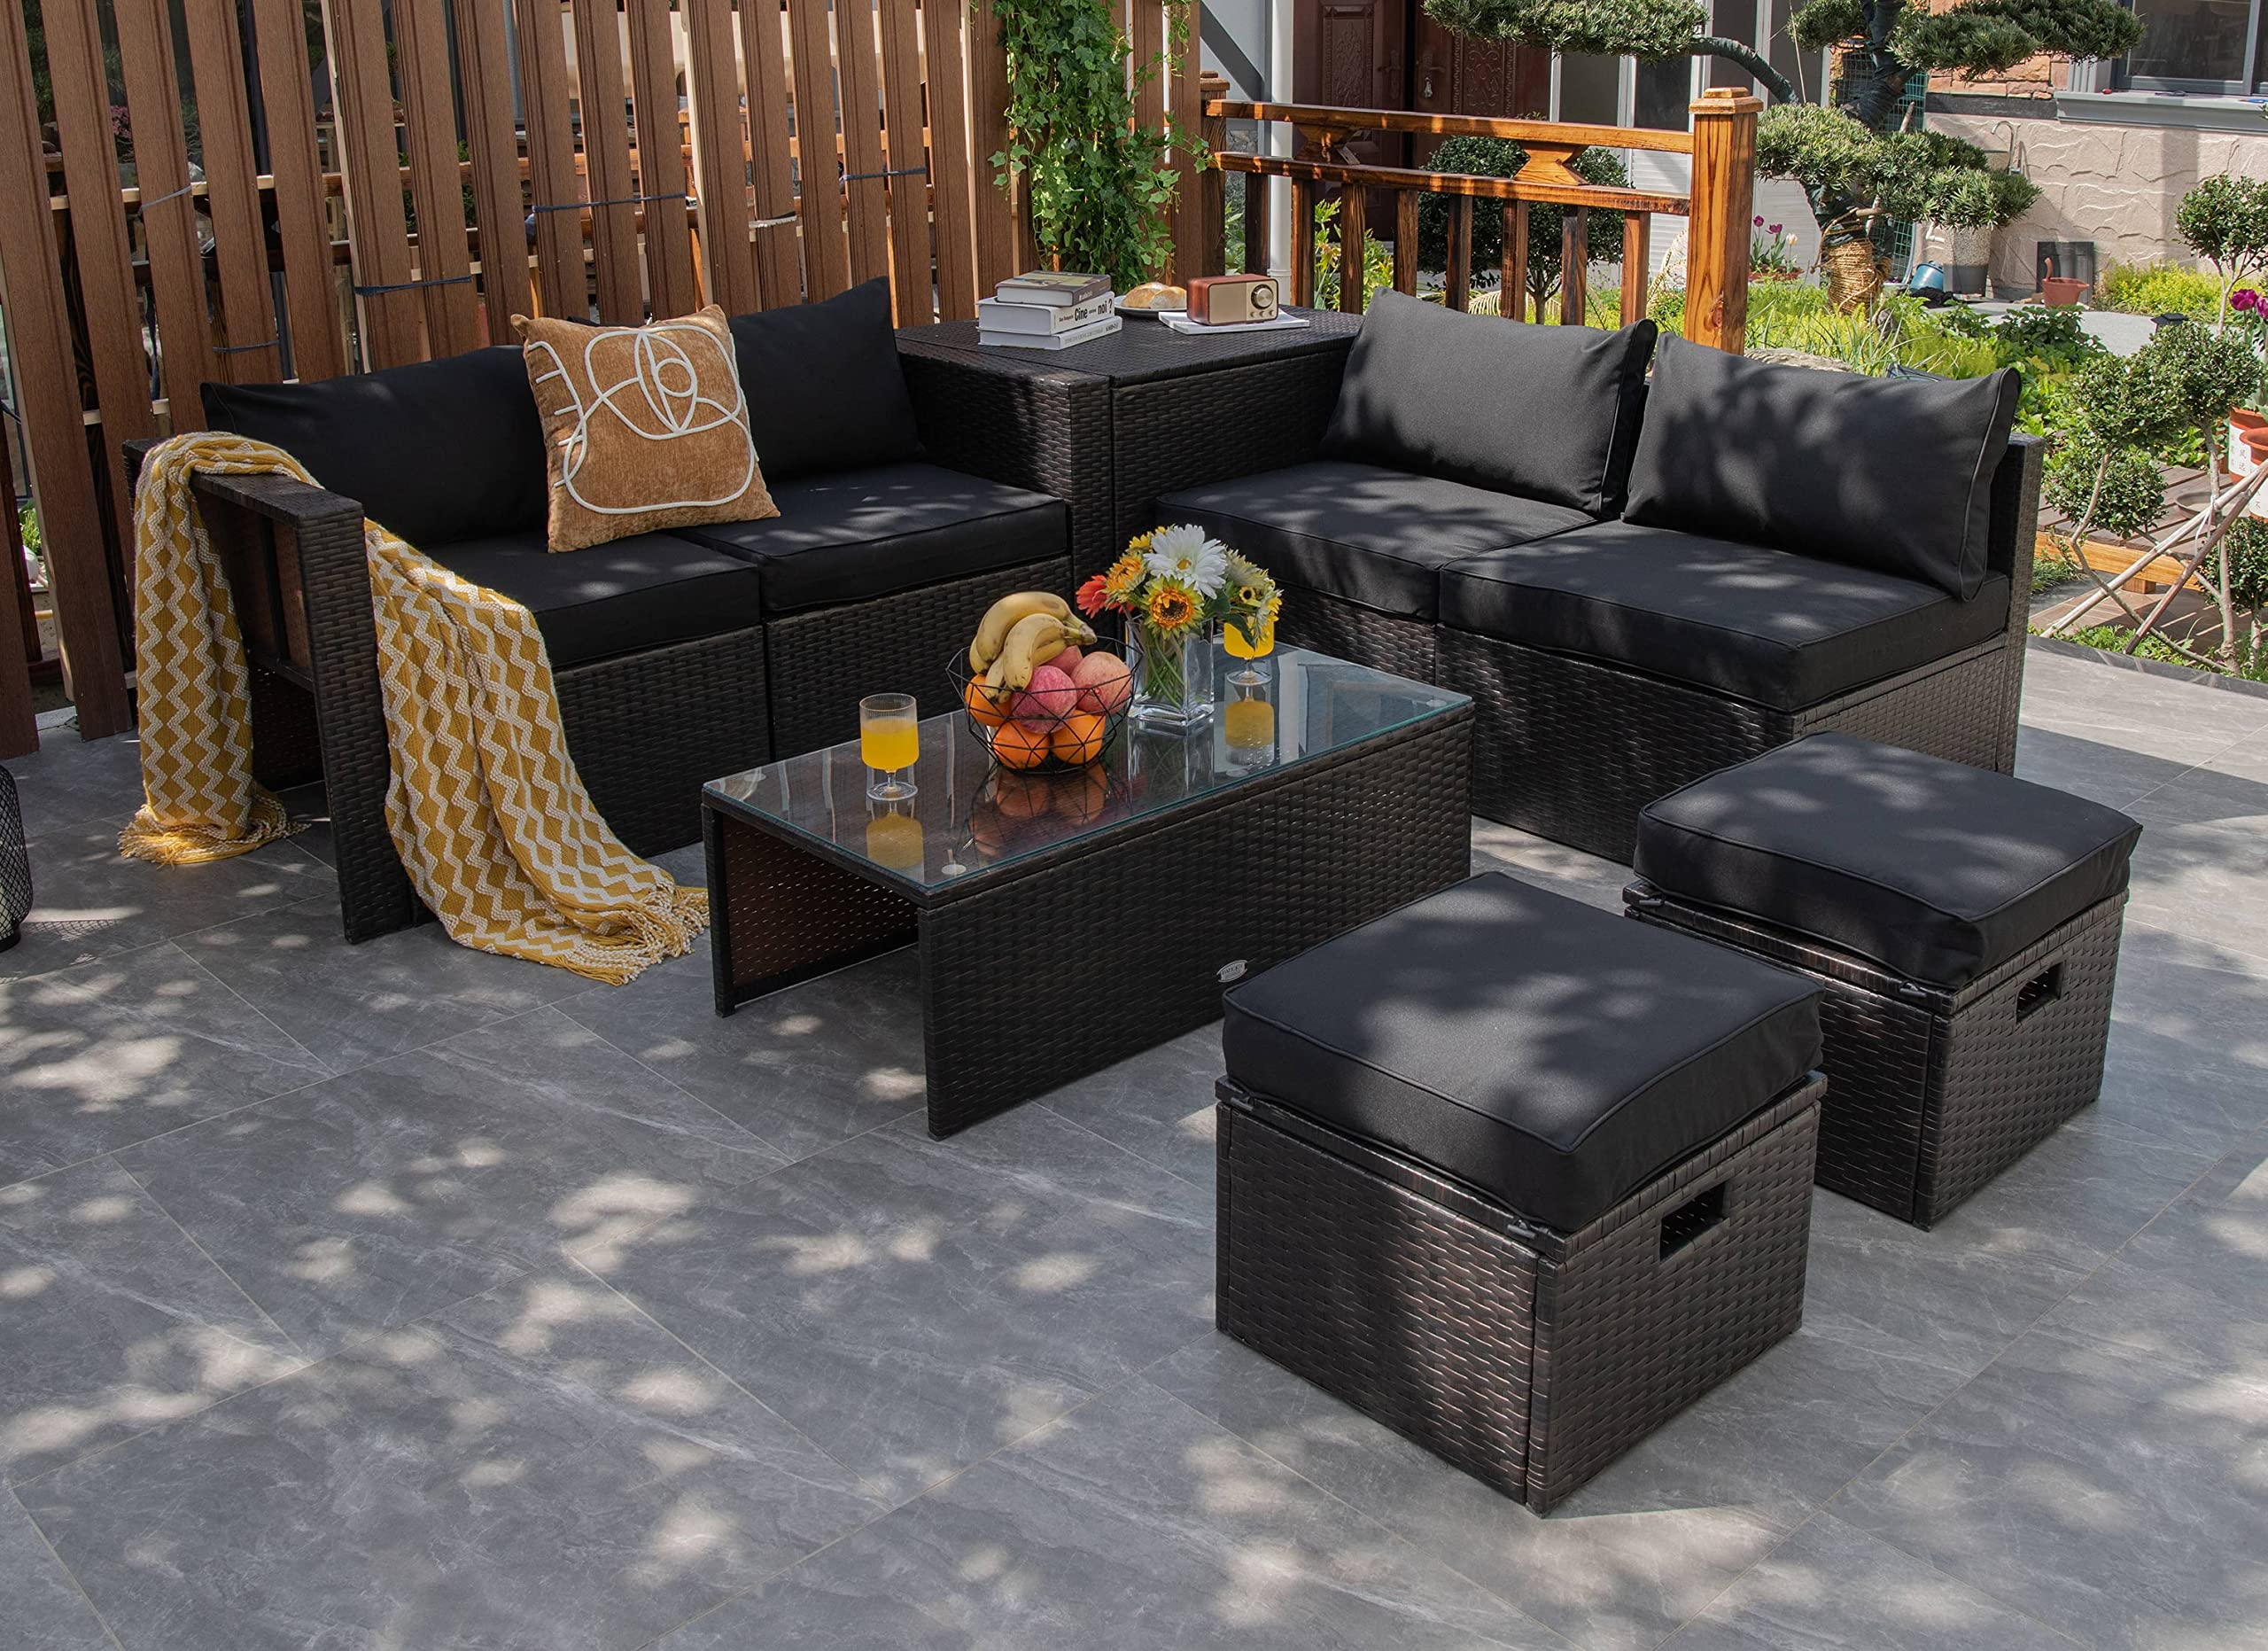 8 Piece Patio Furniture Set for 6 with Waterpfoor Cover - Tangkula